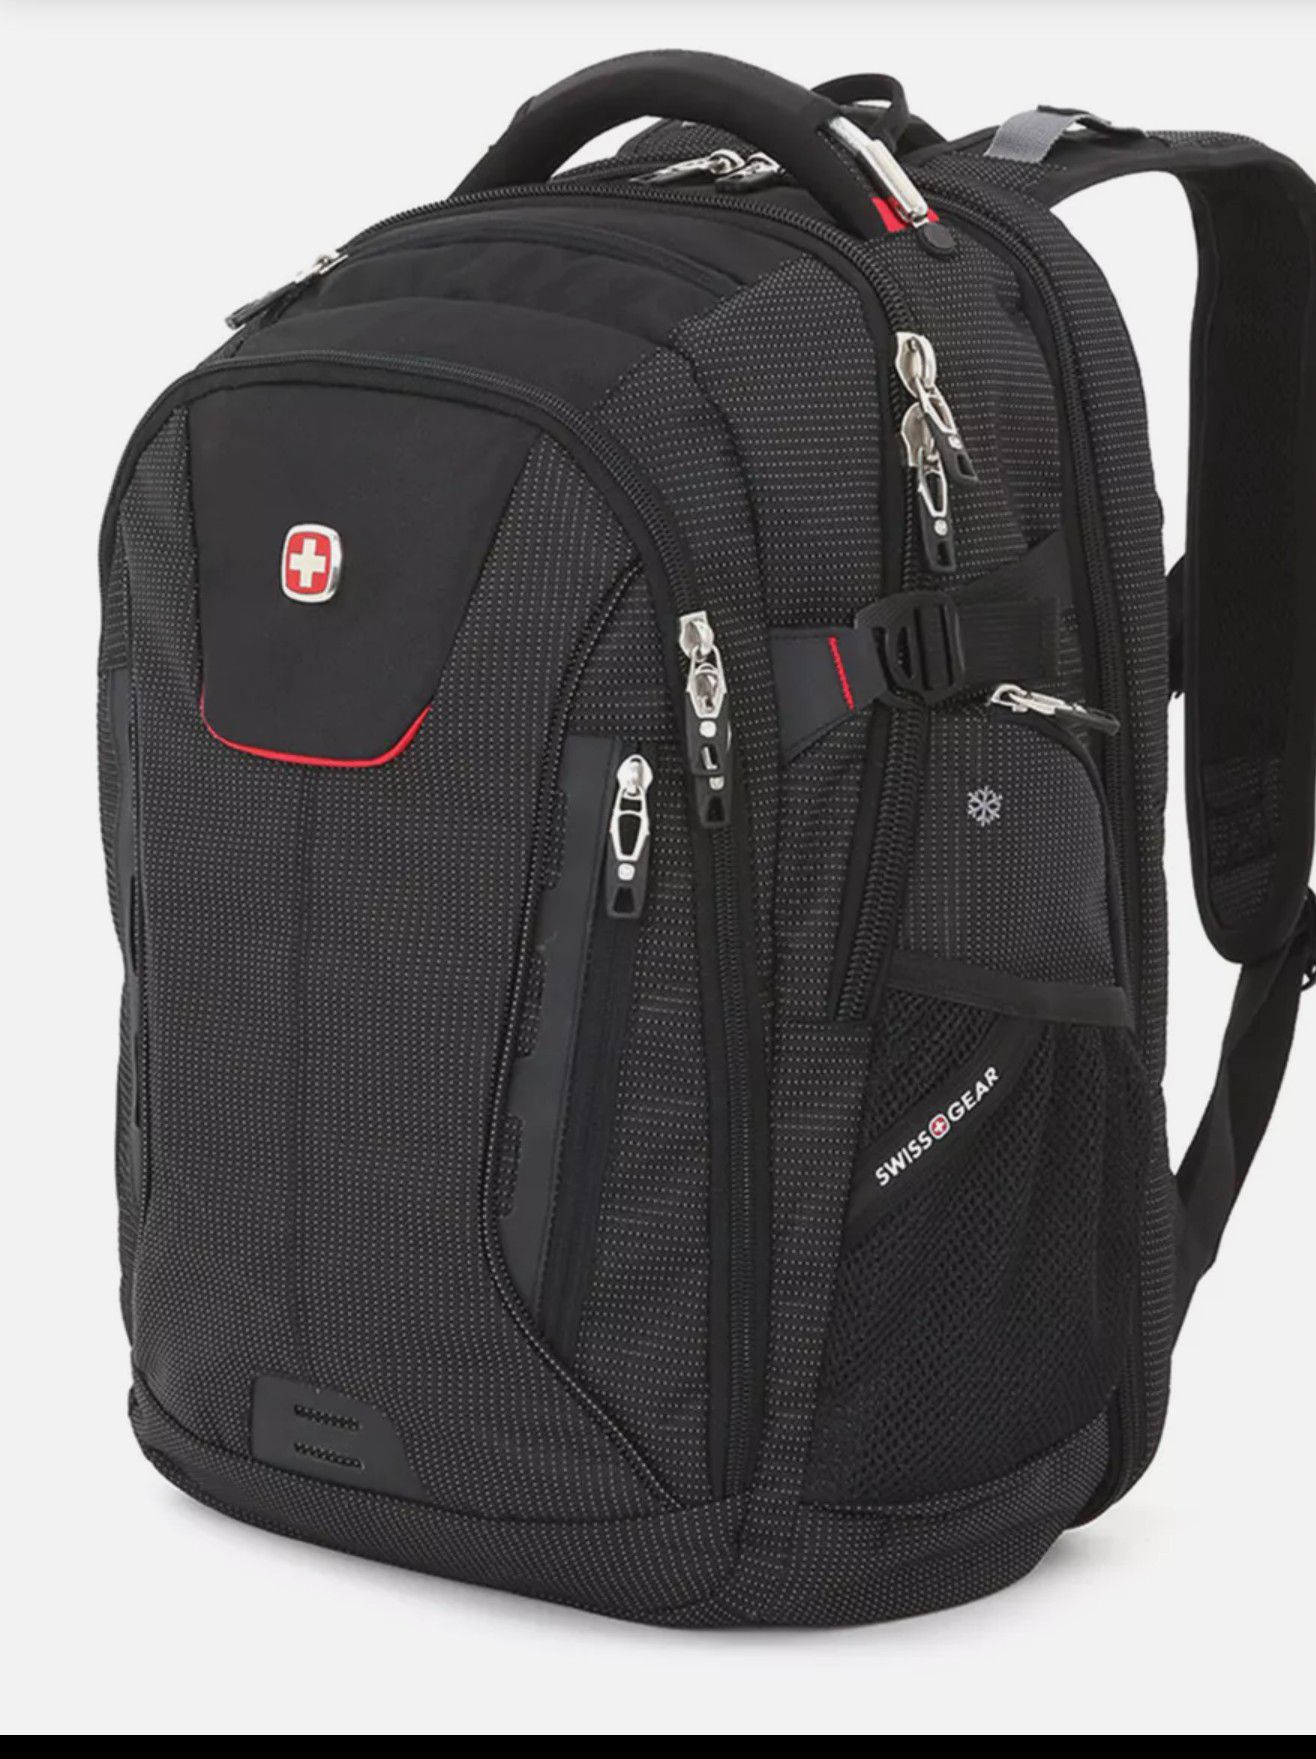 New Swiss gear laptop book bag with usb